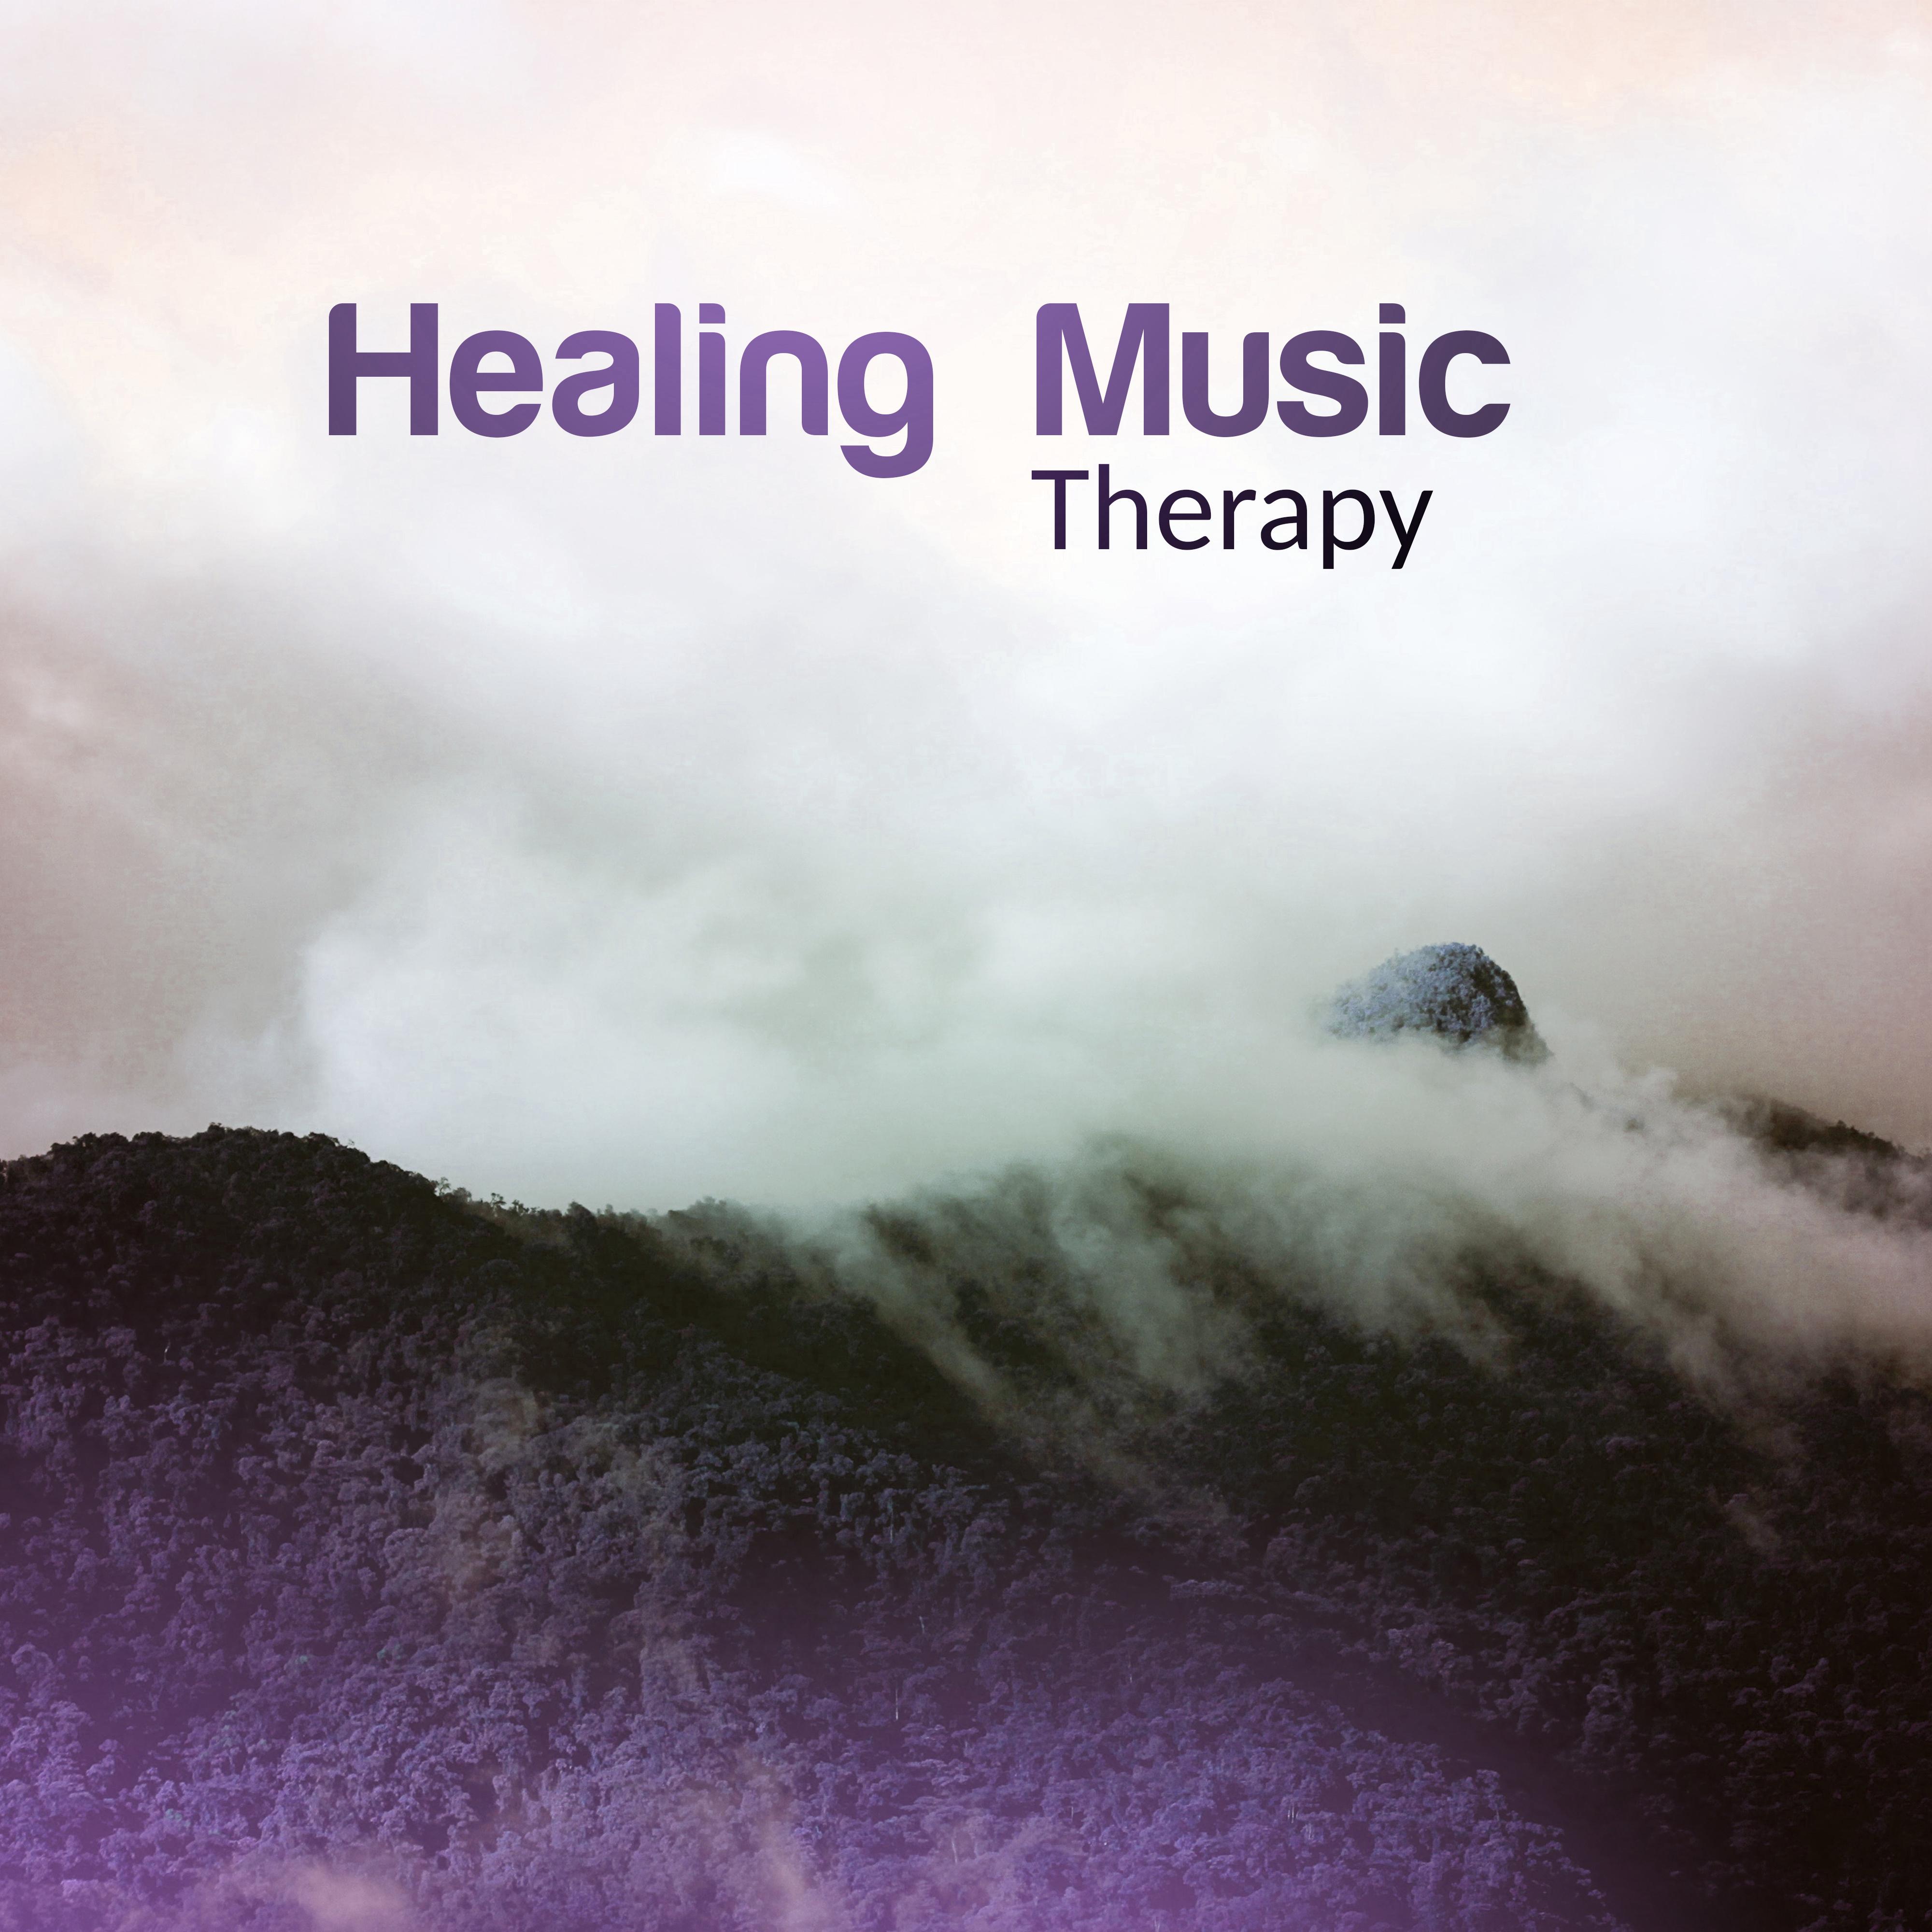 Healing Music Therapy  Relaxing Music, Bliss, Relax, Sounds of Nature, Zen, Calm of Mind